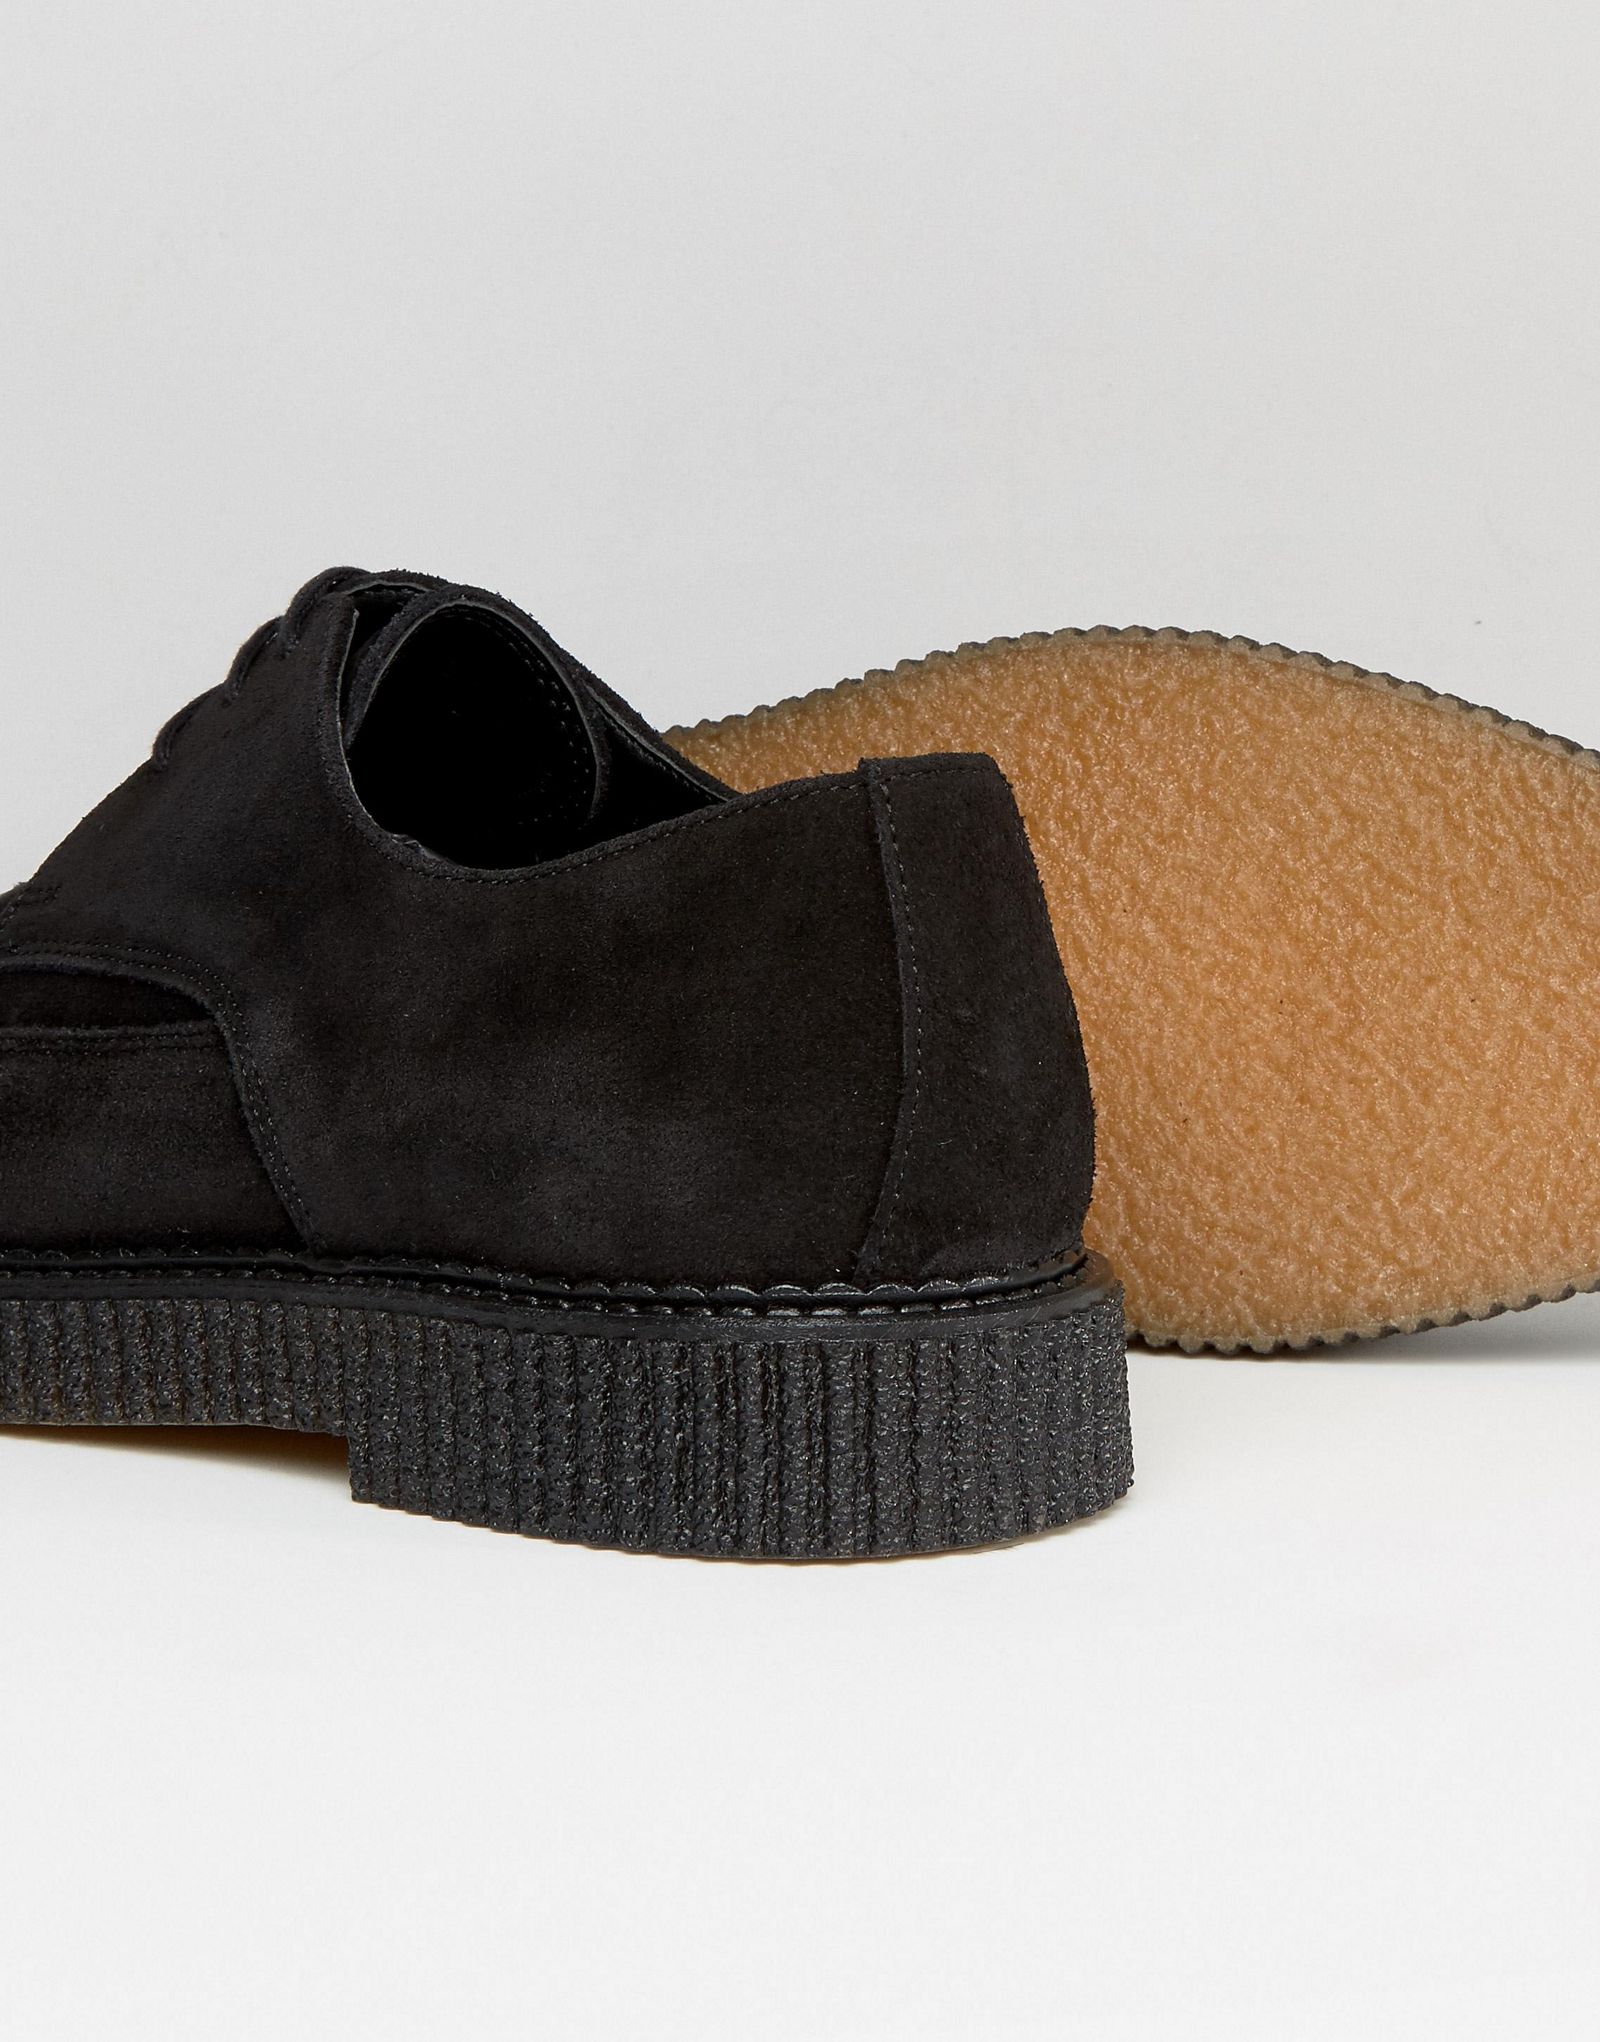 Religion Suede Creeper Derby Shoes